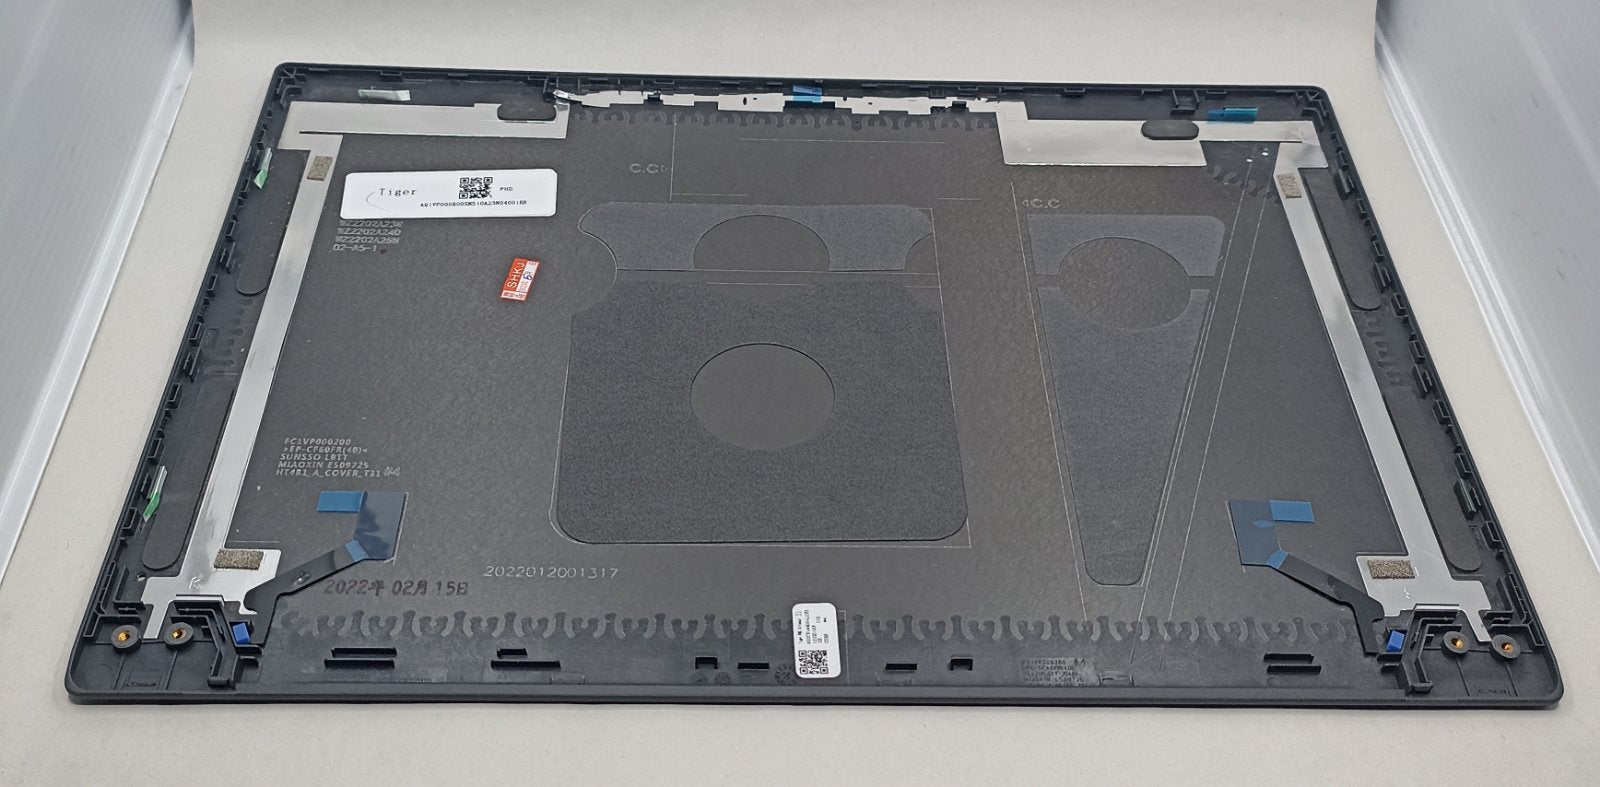 Replacement LCD Cover For Lenovo T14s Gen 2 ThinkPad WL